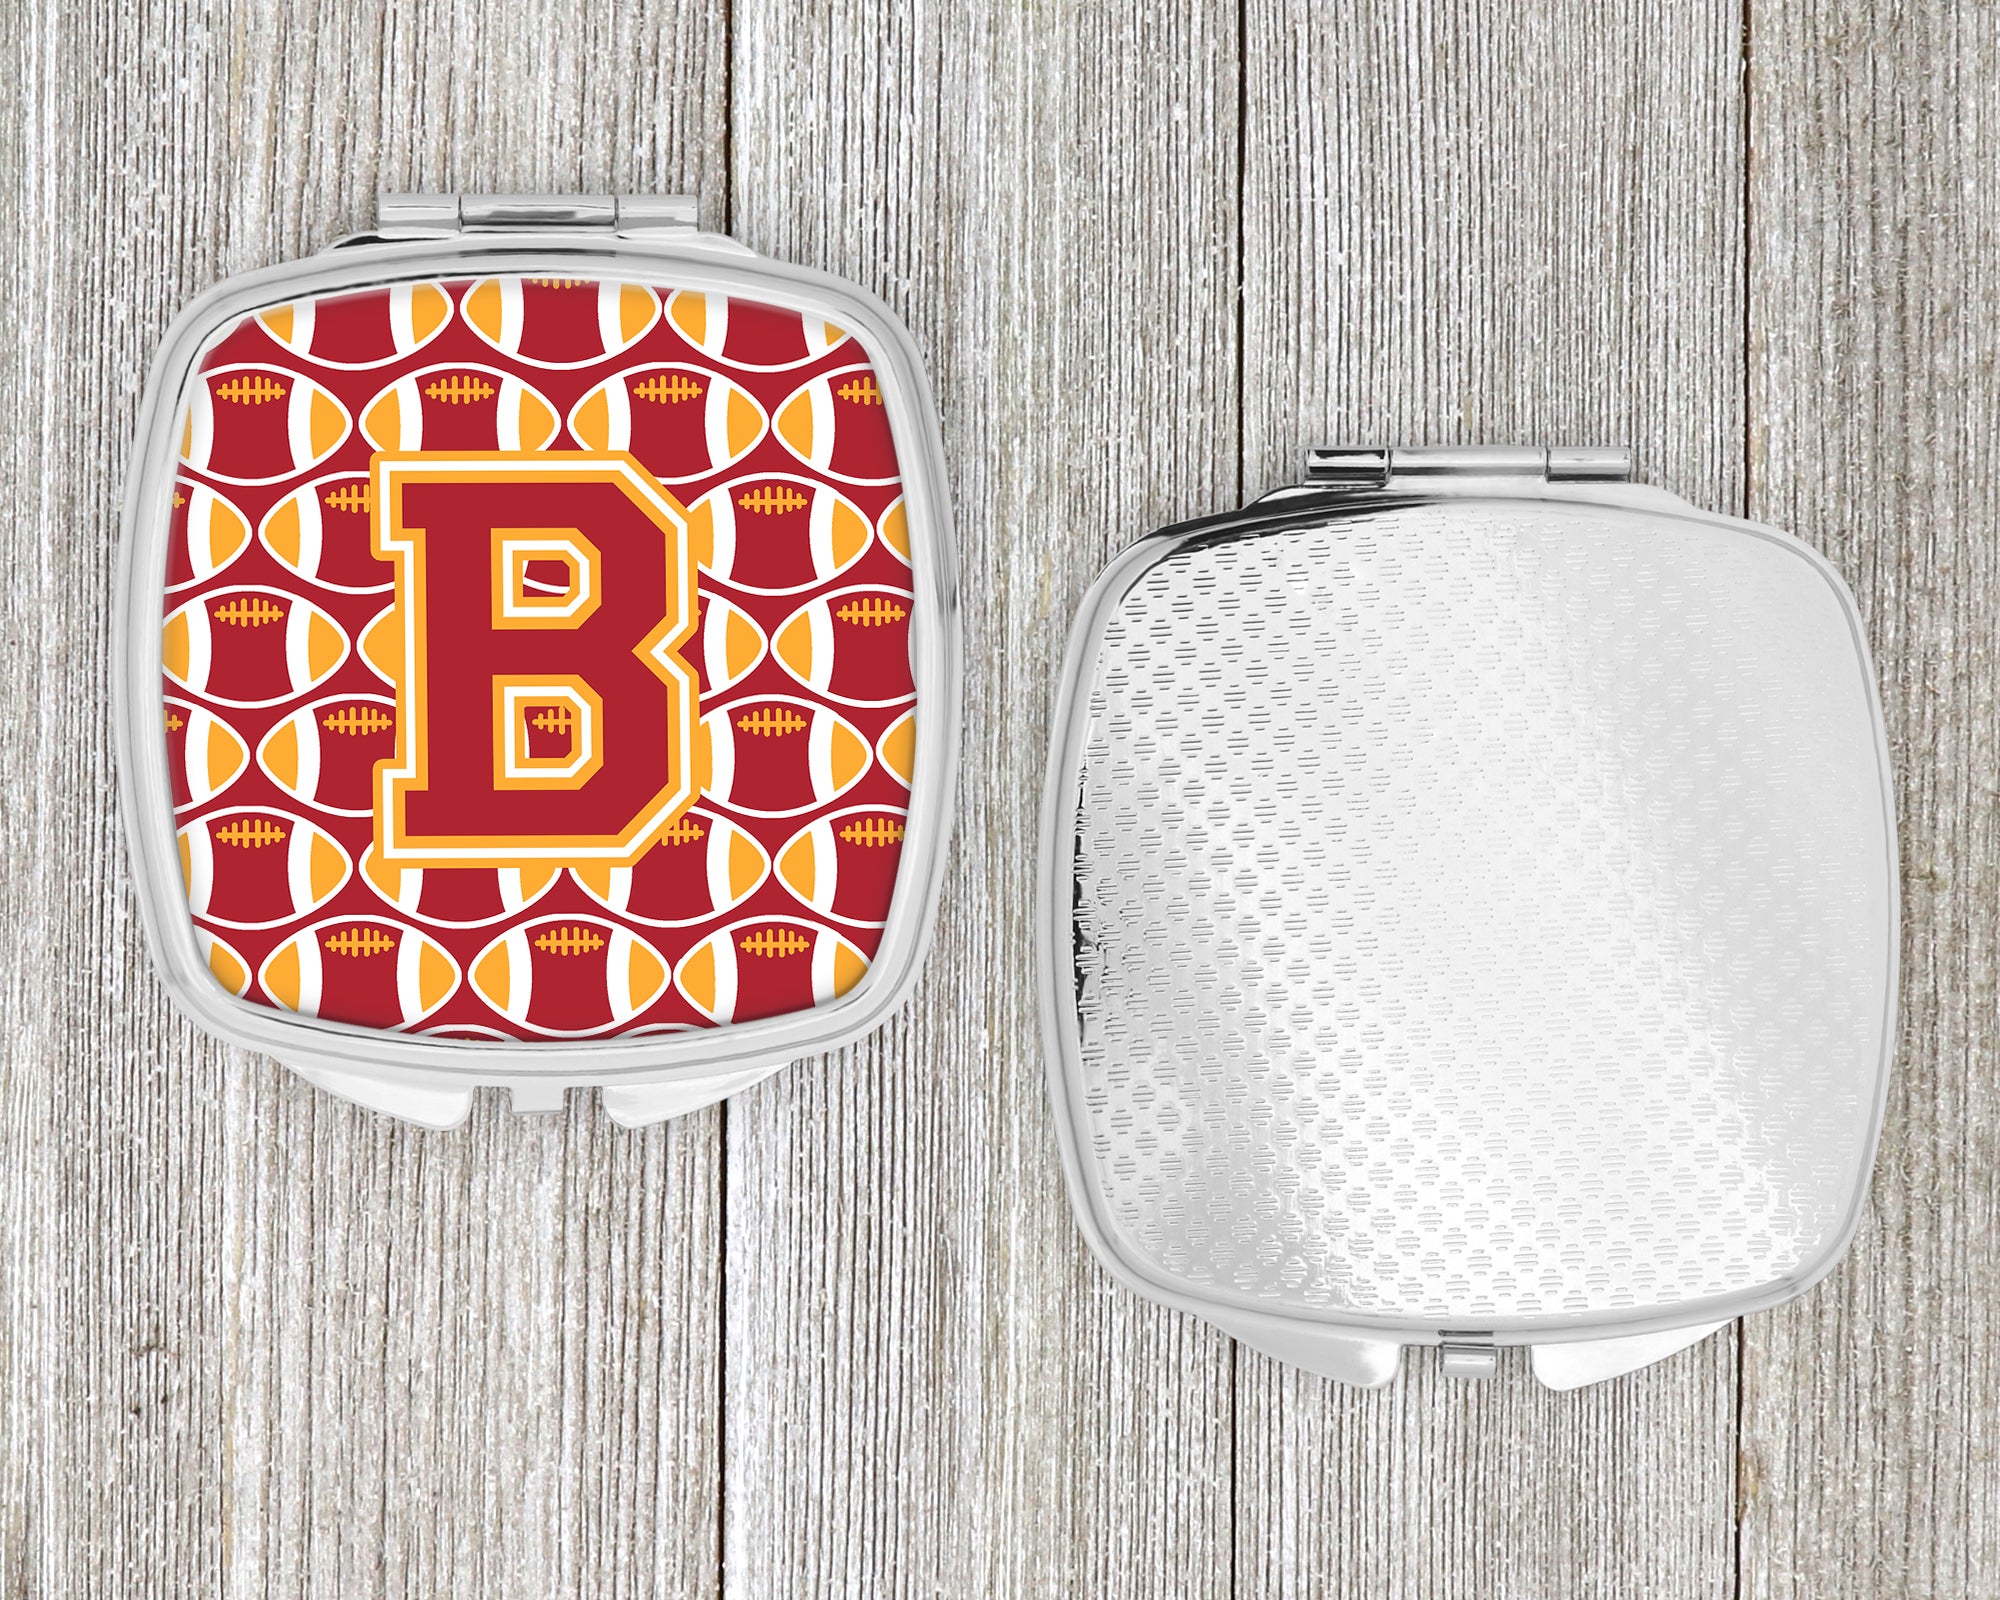 Letter B Football Cardinal and Gold Compact Mirror CJ1070-BSCM  the-store.com.